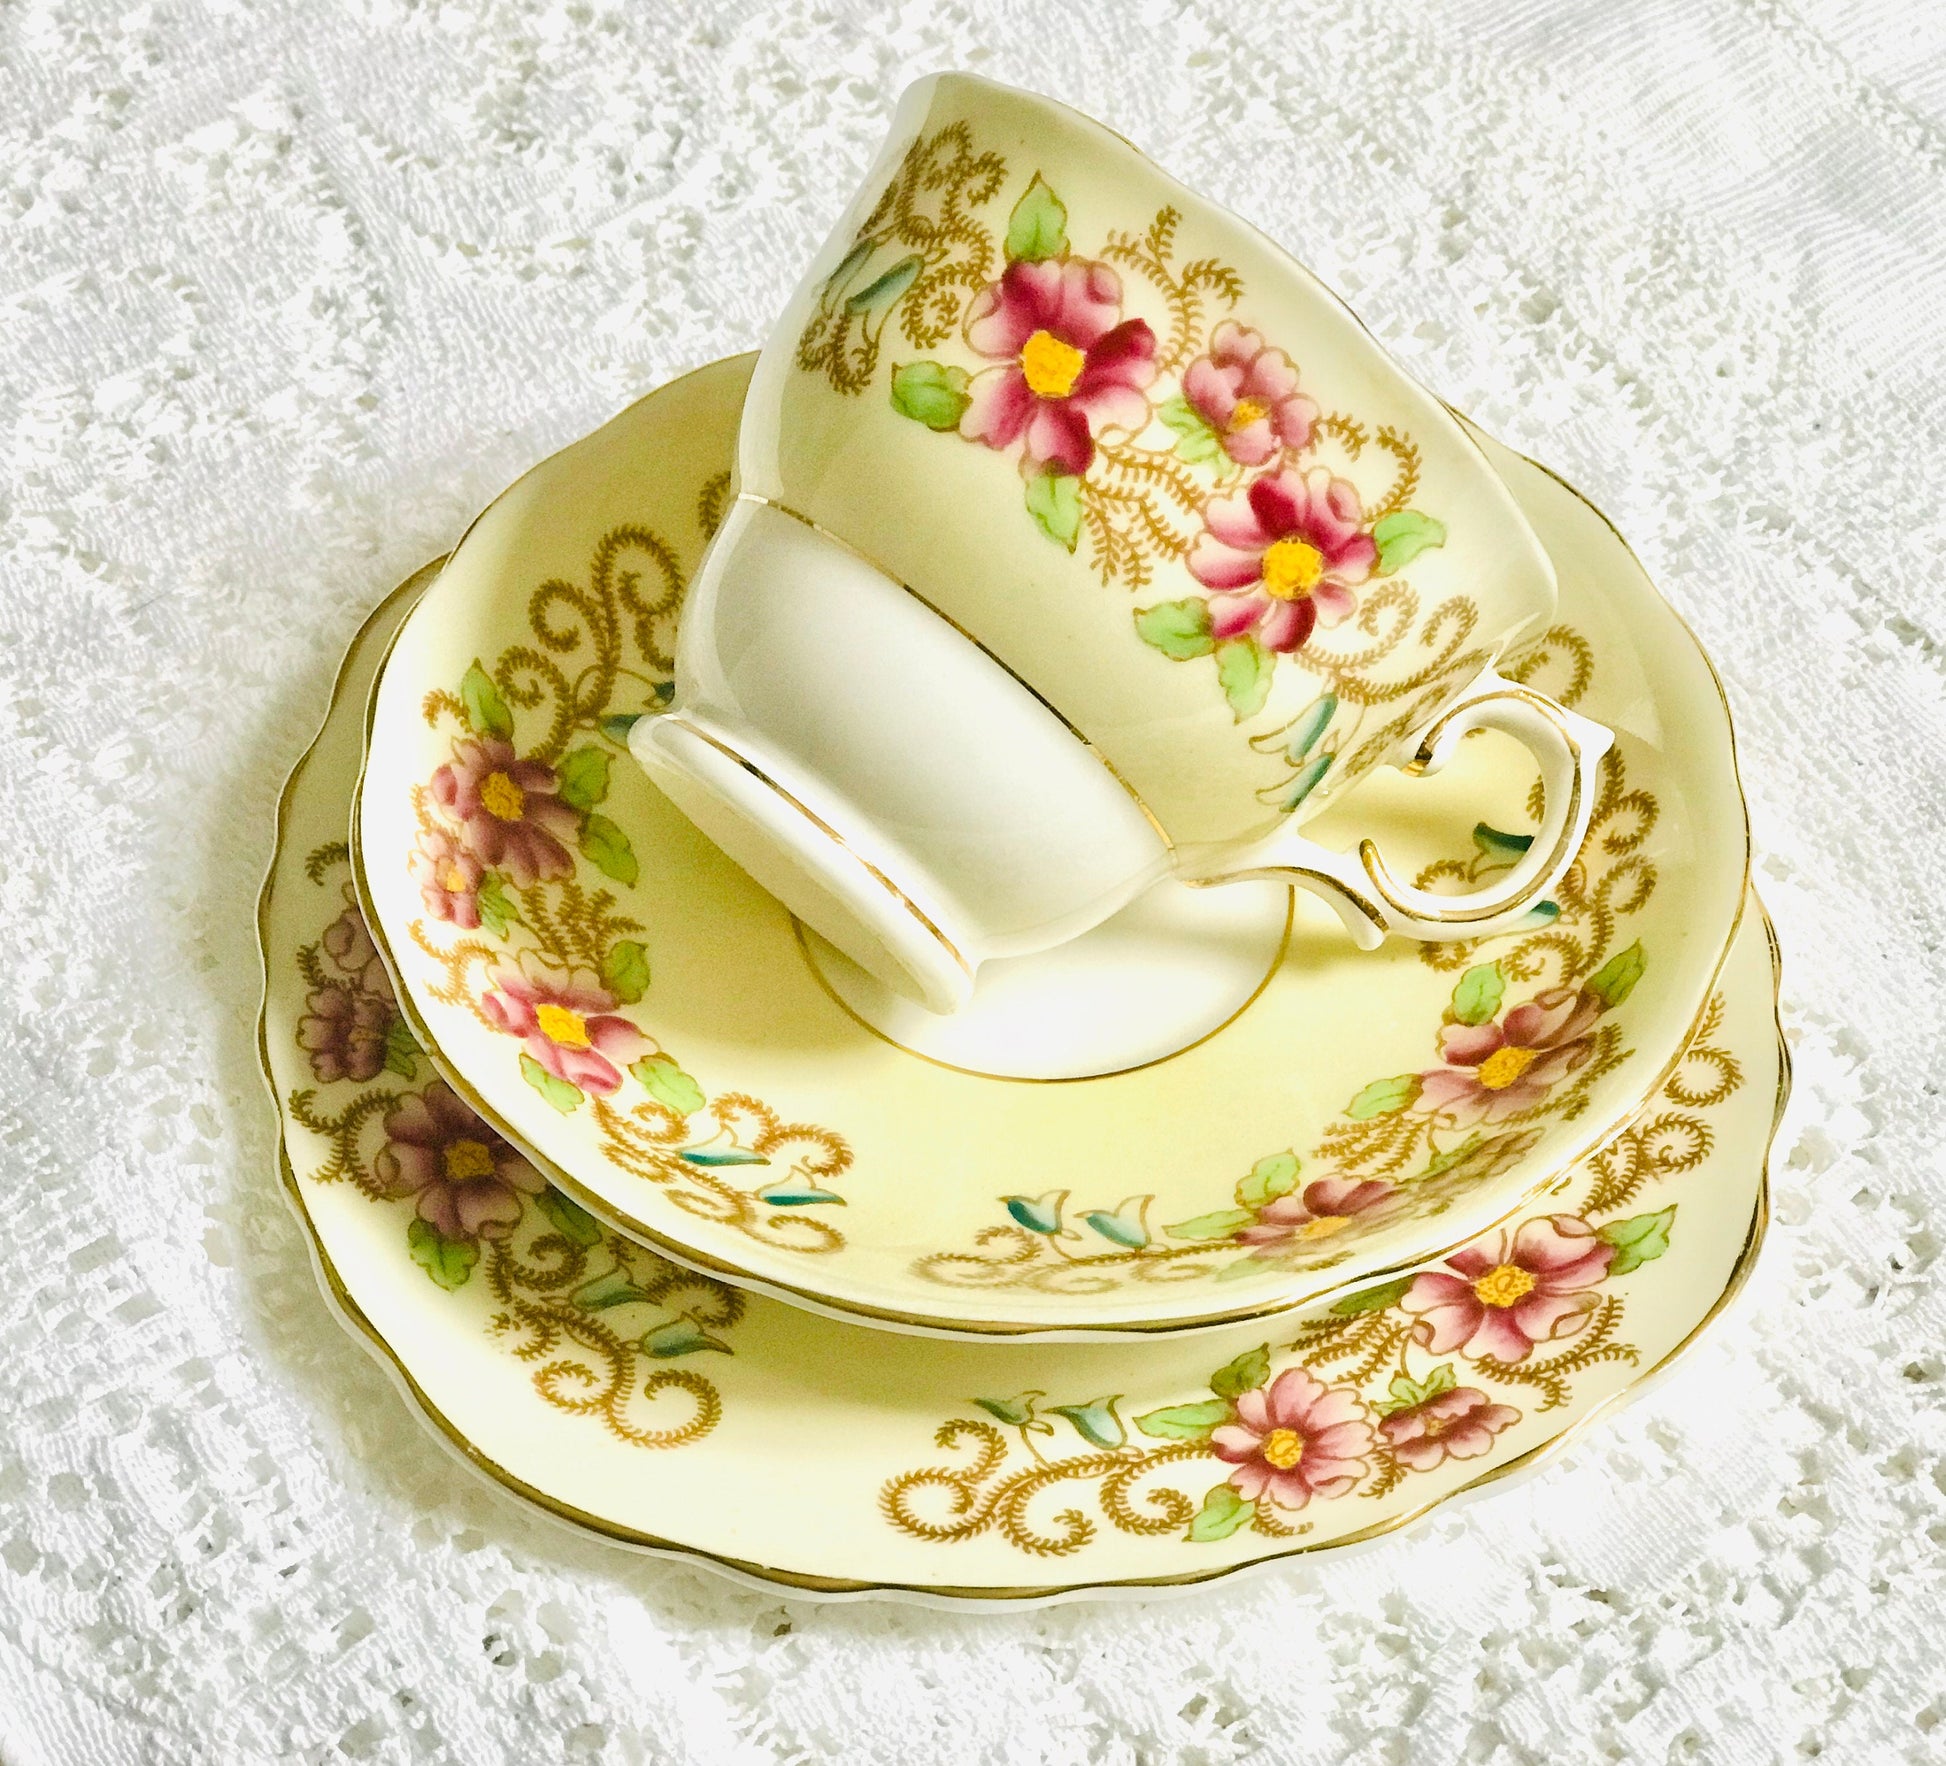 Pretty vintage Afternoon Teacups Colclough English bone china for afternoon tea teacup saucer and tea plate yellow pink flowers